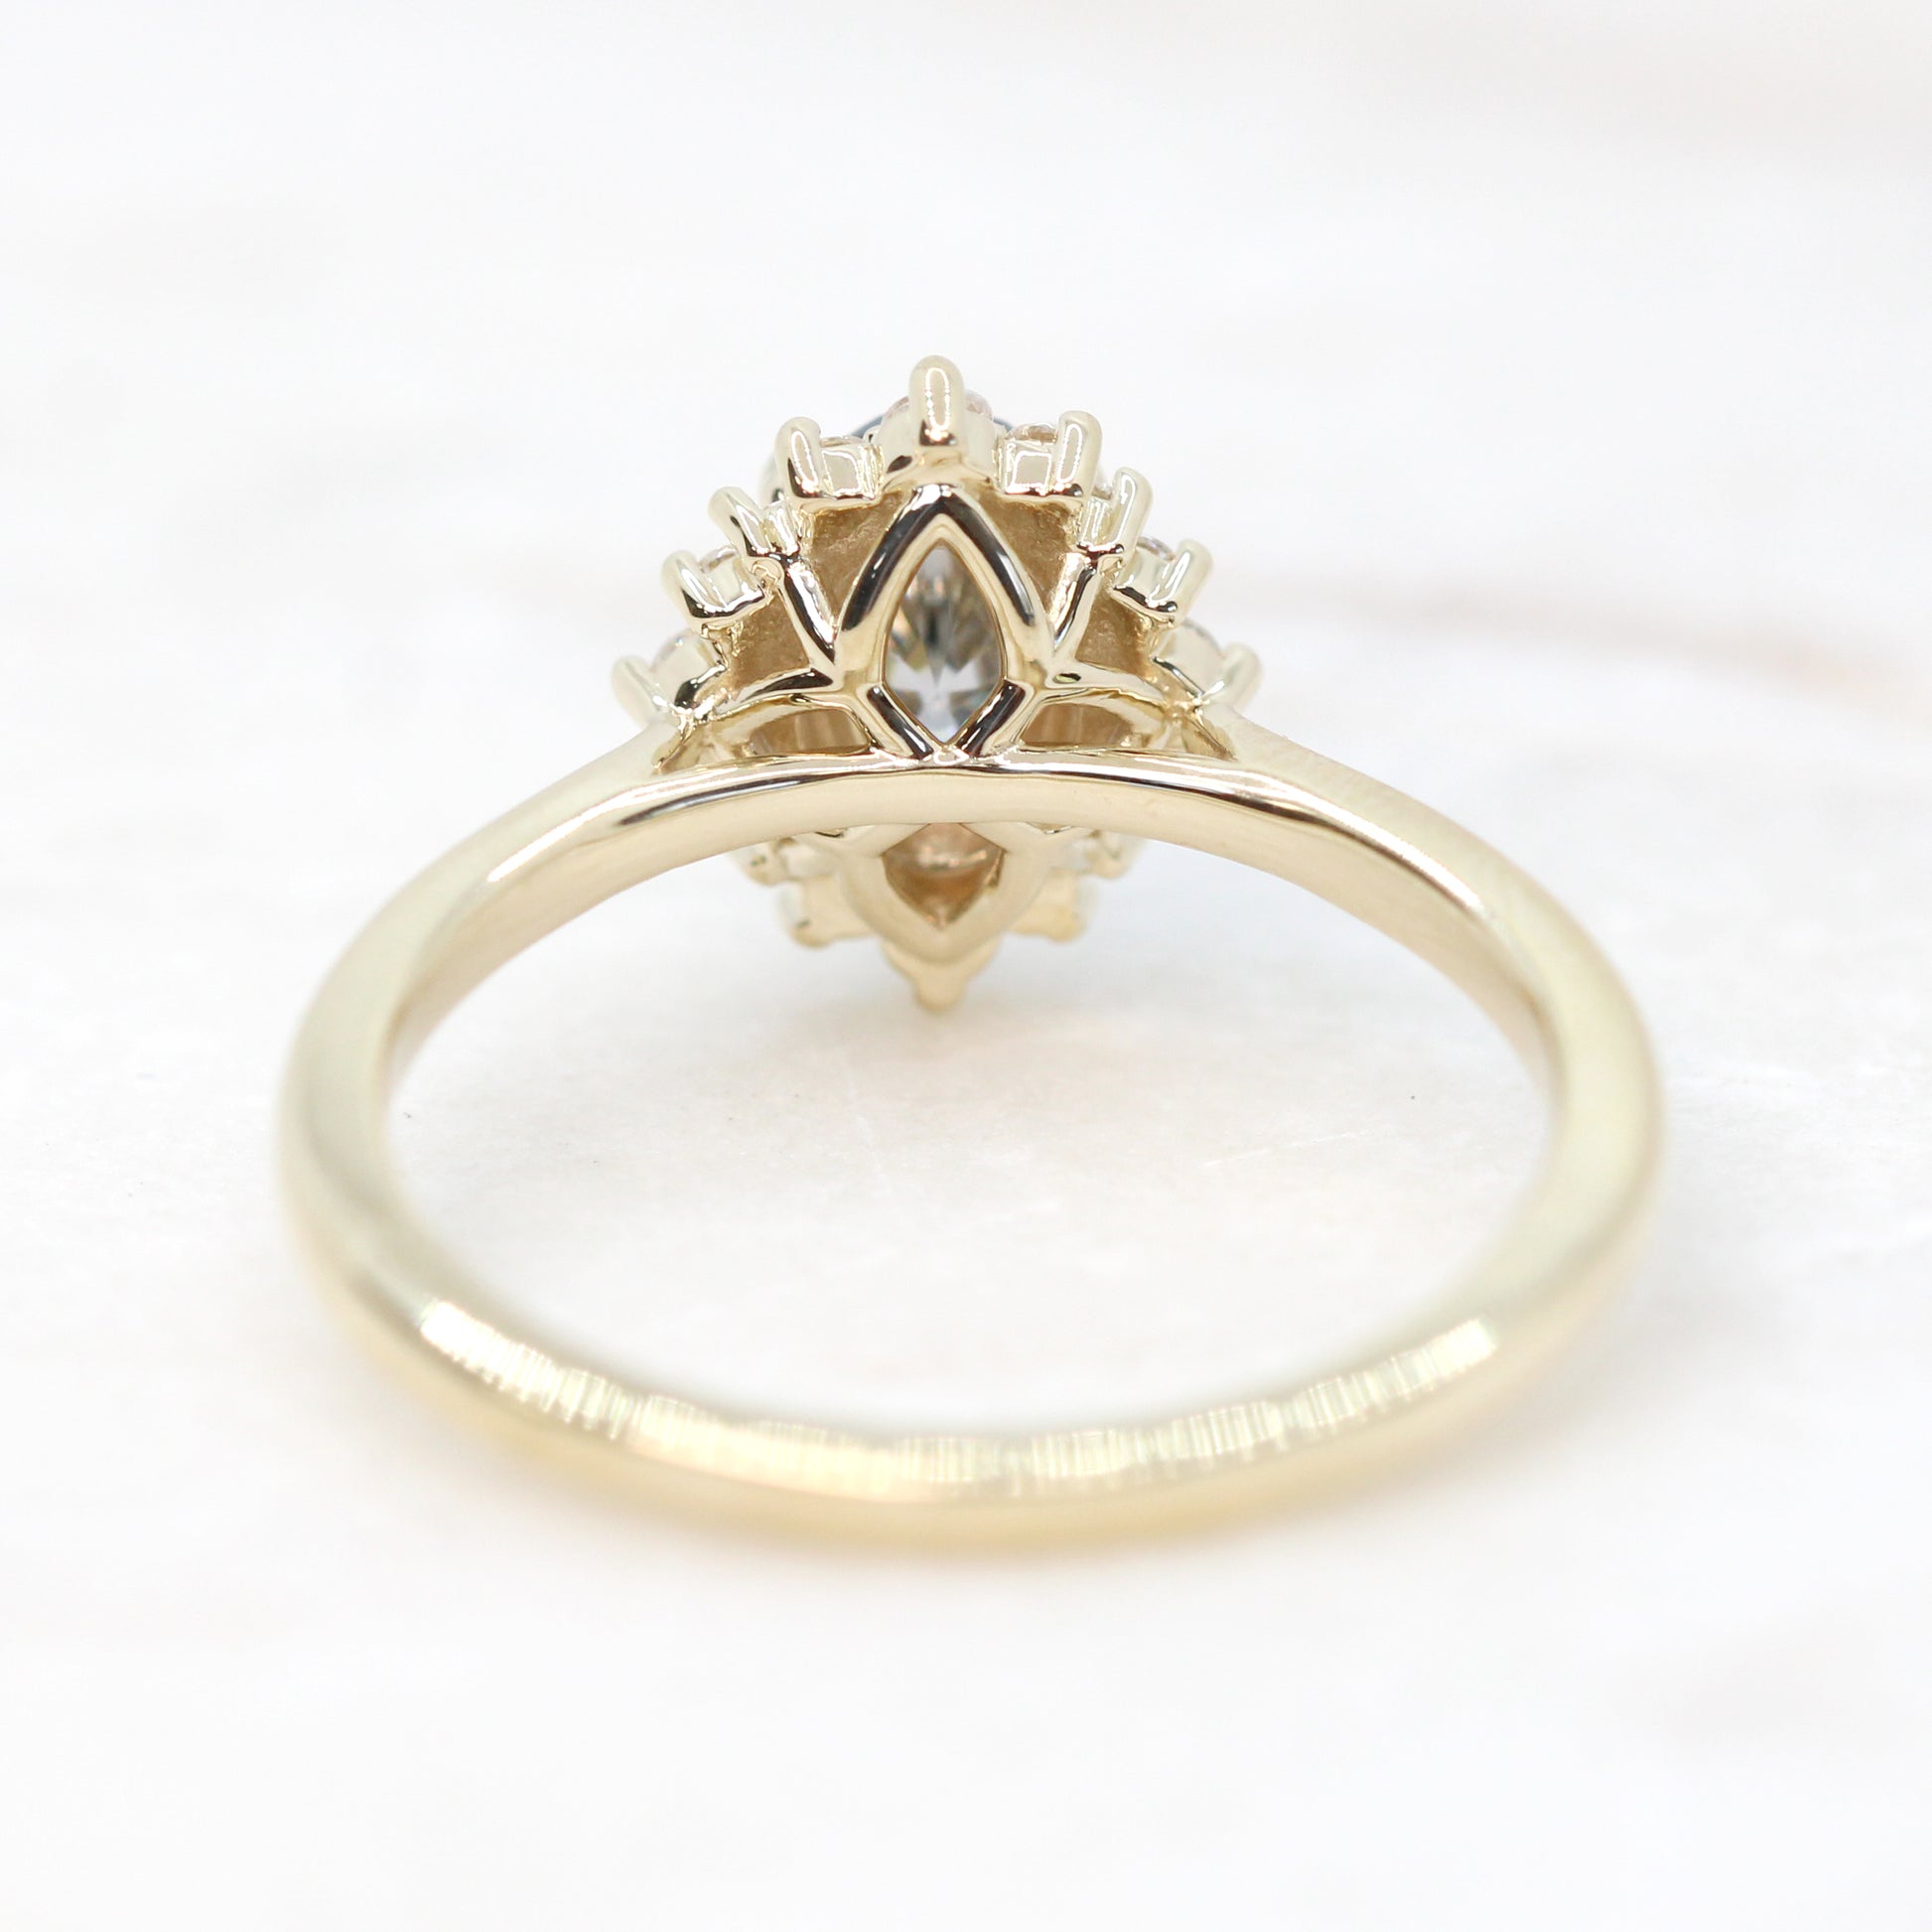 Lena Ring with an Gray Oval Moissanite and Moissanite Accents - Made to Order, Choose Your Gold Tone - Midwinter Co. Alternative Bridal Rings and Modern Fine Jewelry